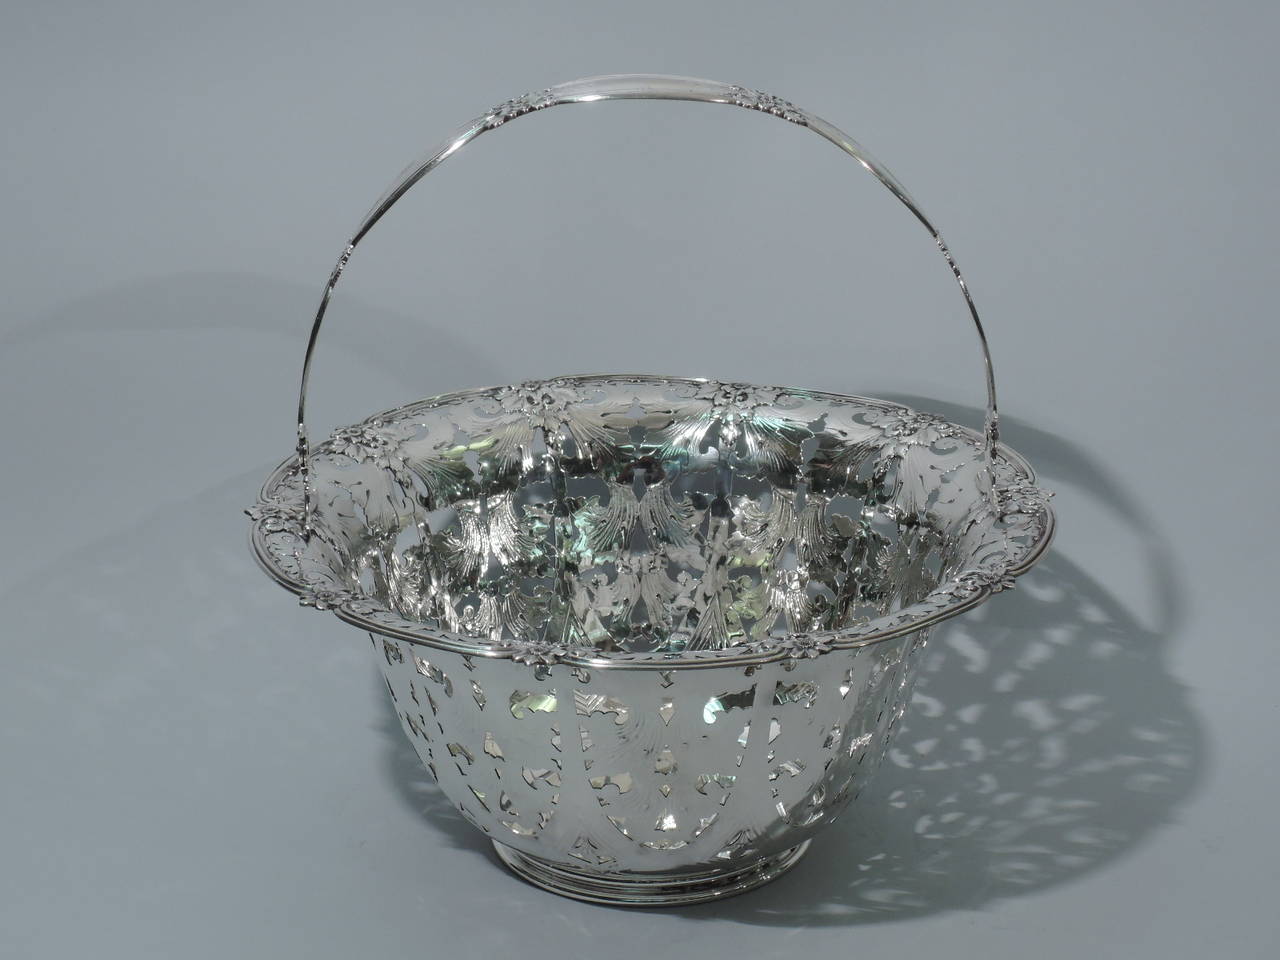 Large and heavy sterling silver basket. Made by Tiffany & Co. in New York, ca. 1910. Tapering sides and flared rim. Rests on molded foot. Solid well. Interior sides are engraved and pierced: inverted arcade with geometric ornament and foliage. Rim